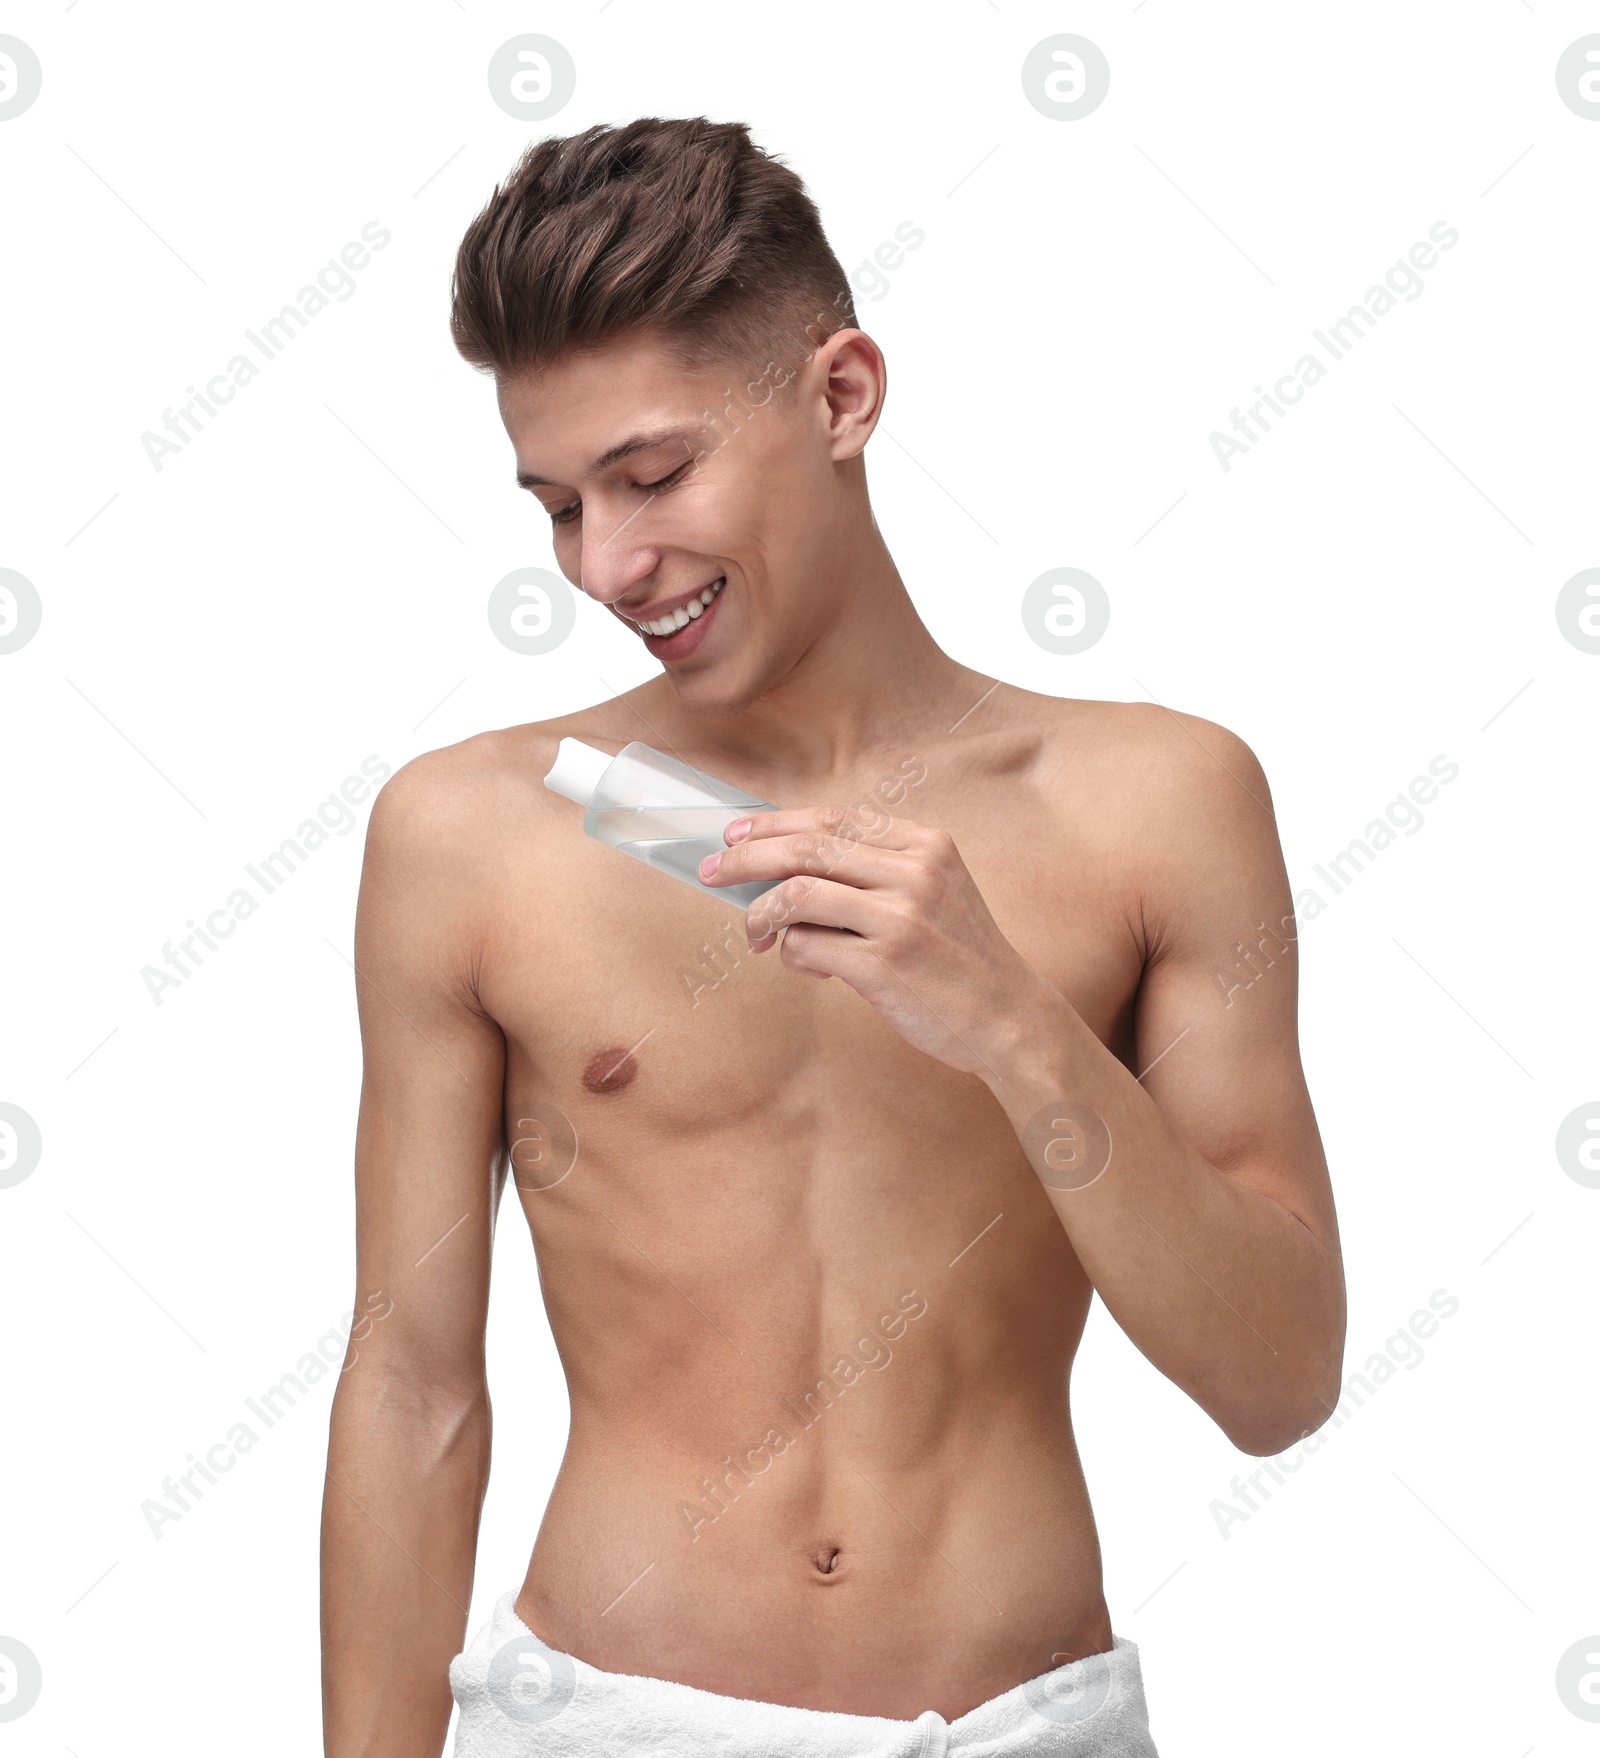 Photo of Handsome man applying lotion onto his body on white background